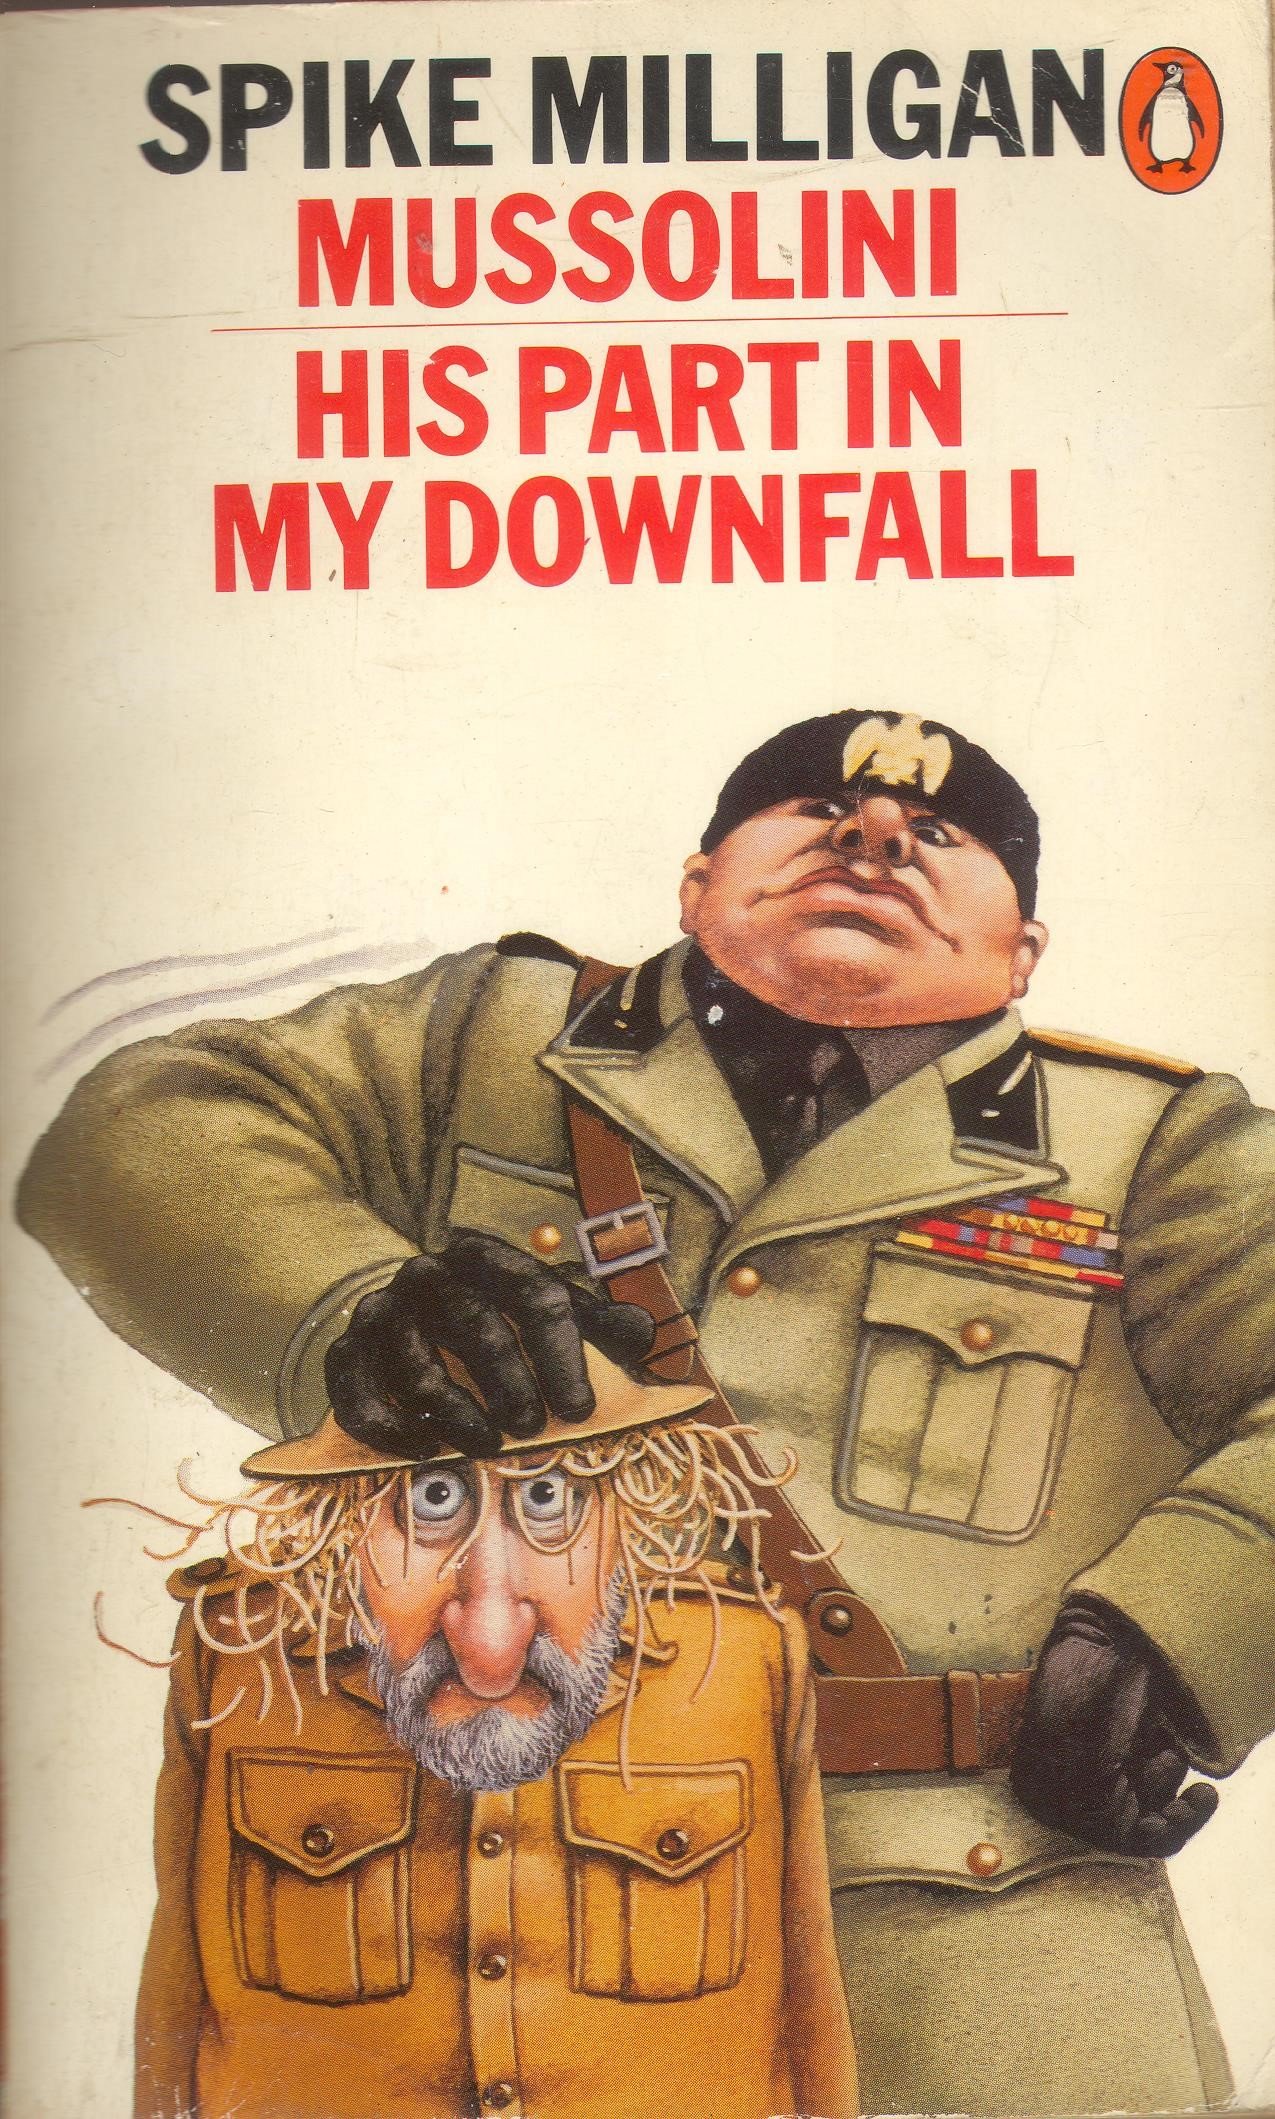 Mussolini: His Part in My Downfall